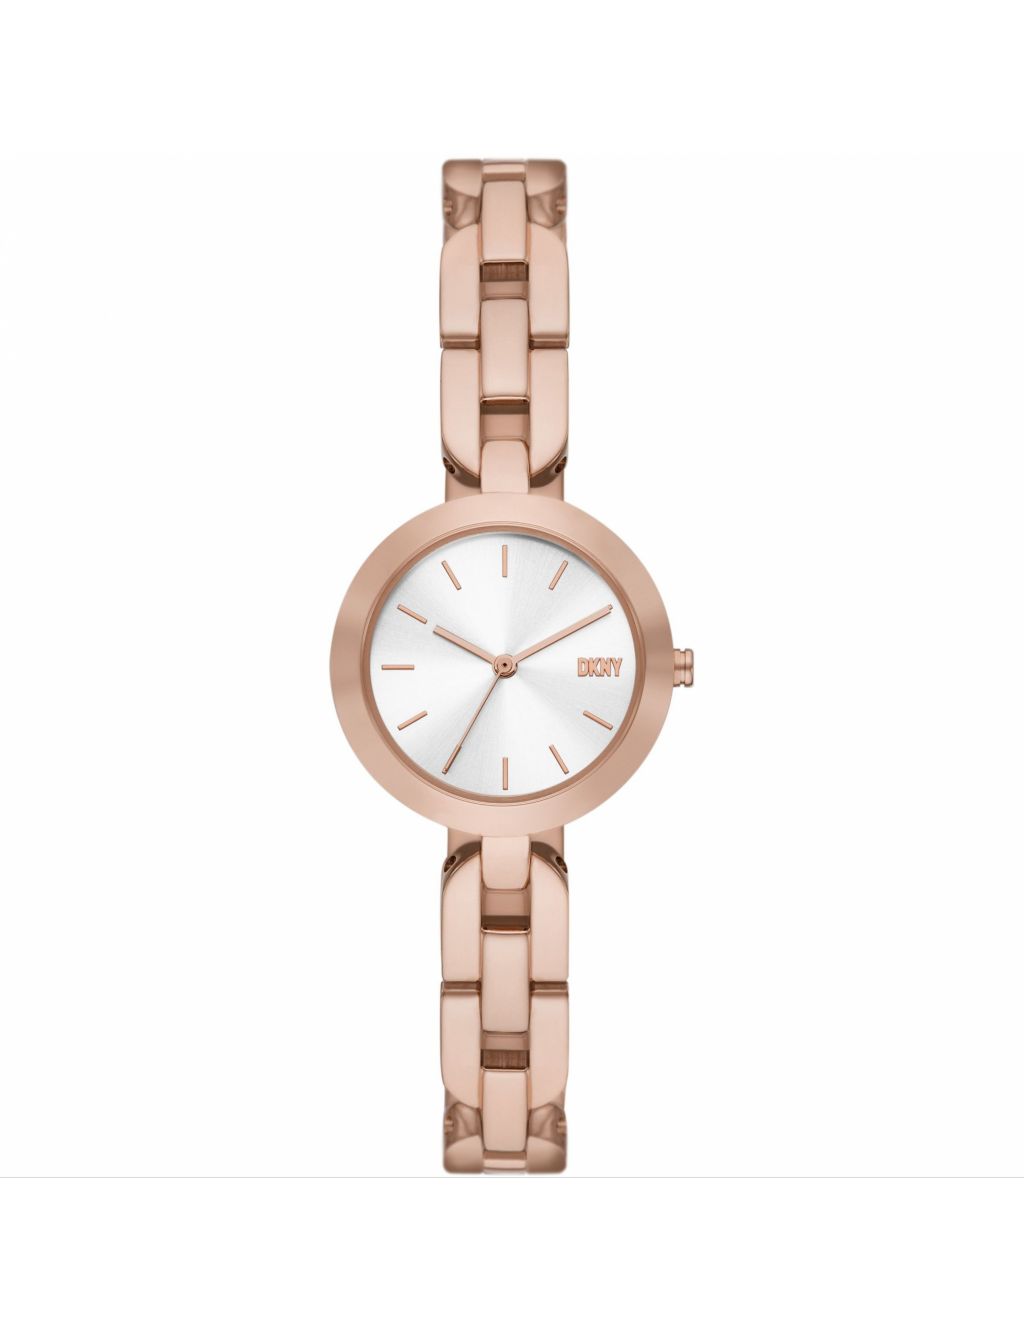 DKNY City Link Stainless Steel Watch | DKNY | M&S